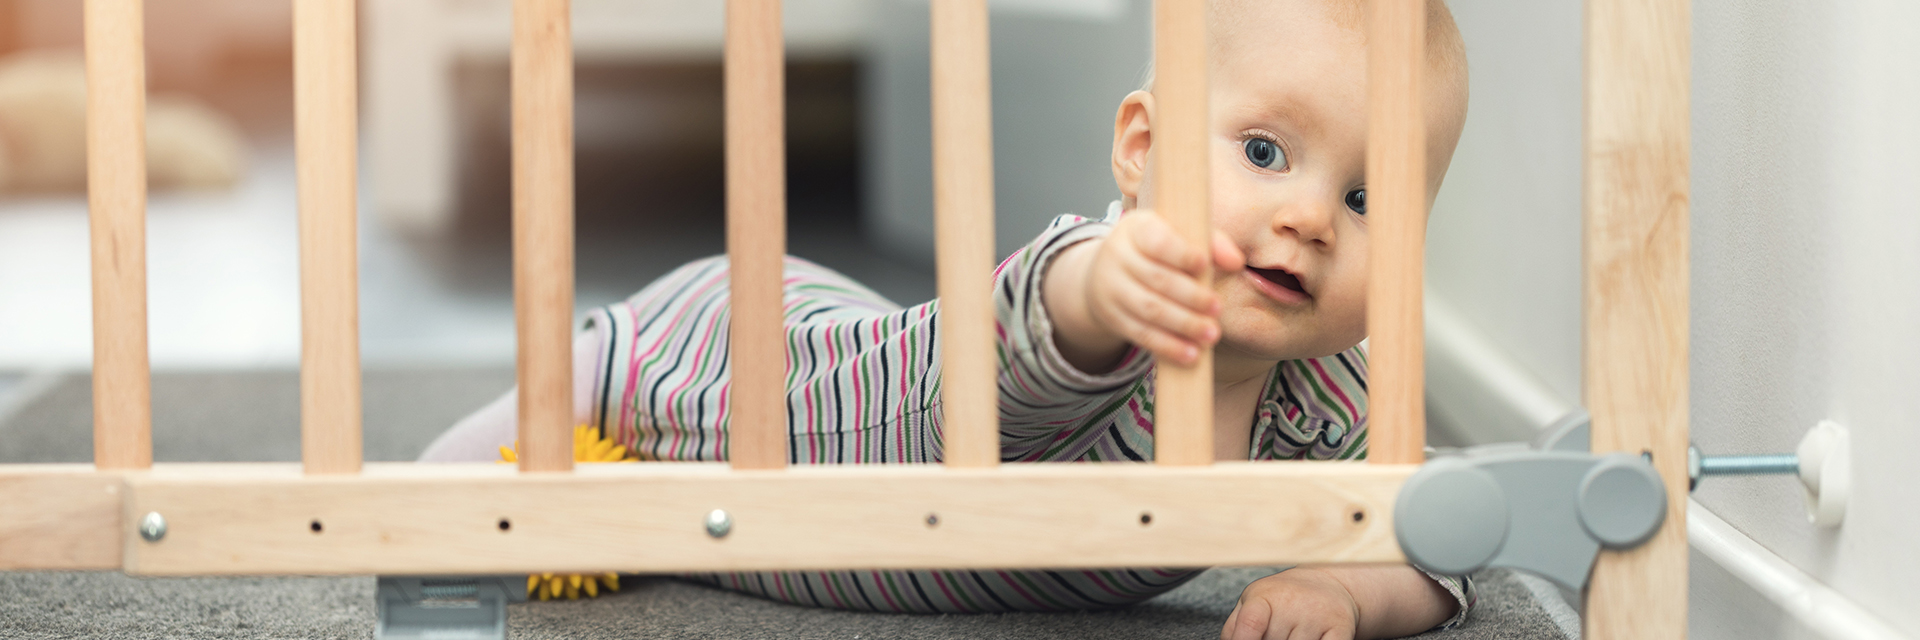 Infant at baby gate